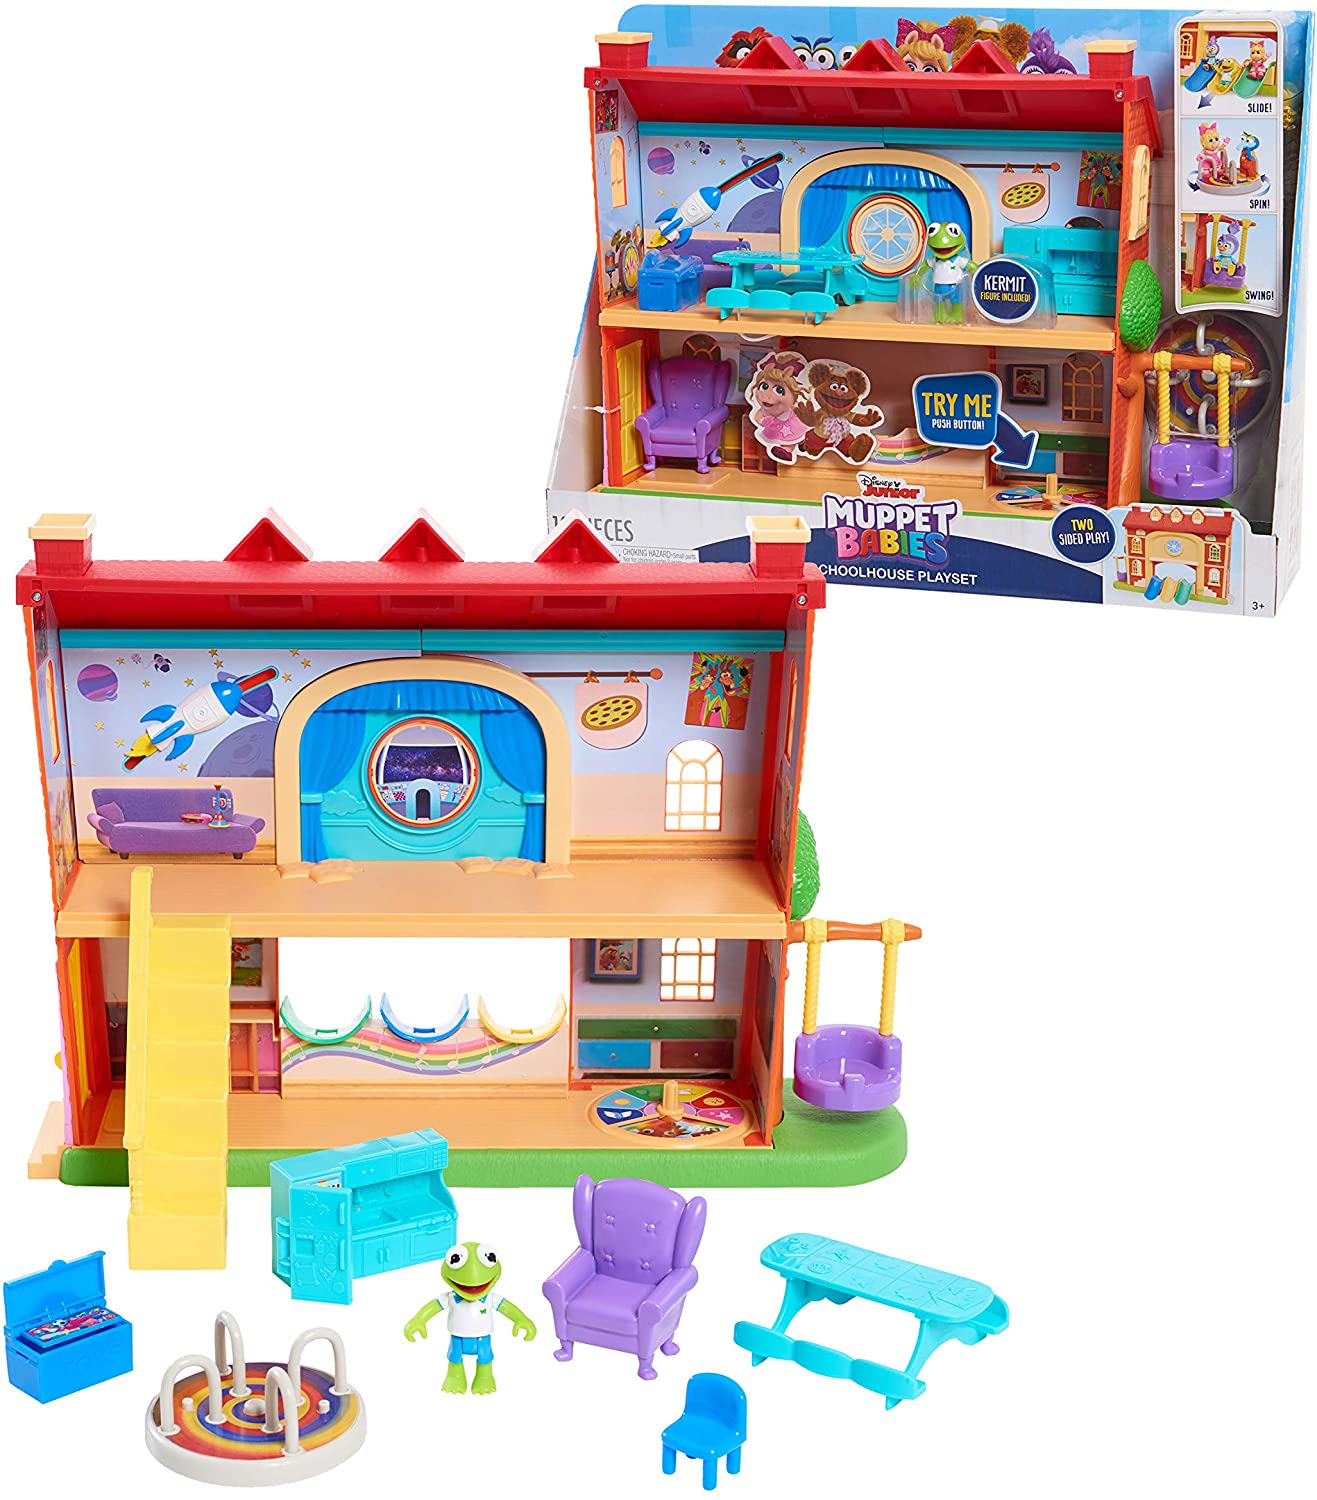 Disney Junior Muppets Babies School House Playset $19 + Free Shipping w/ Amazon Prime or Orders $25+